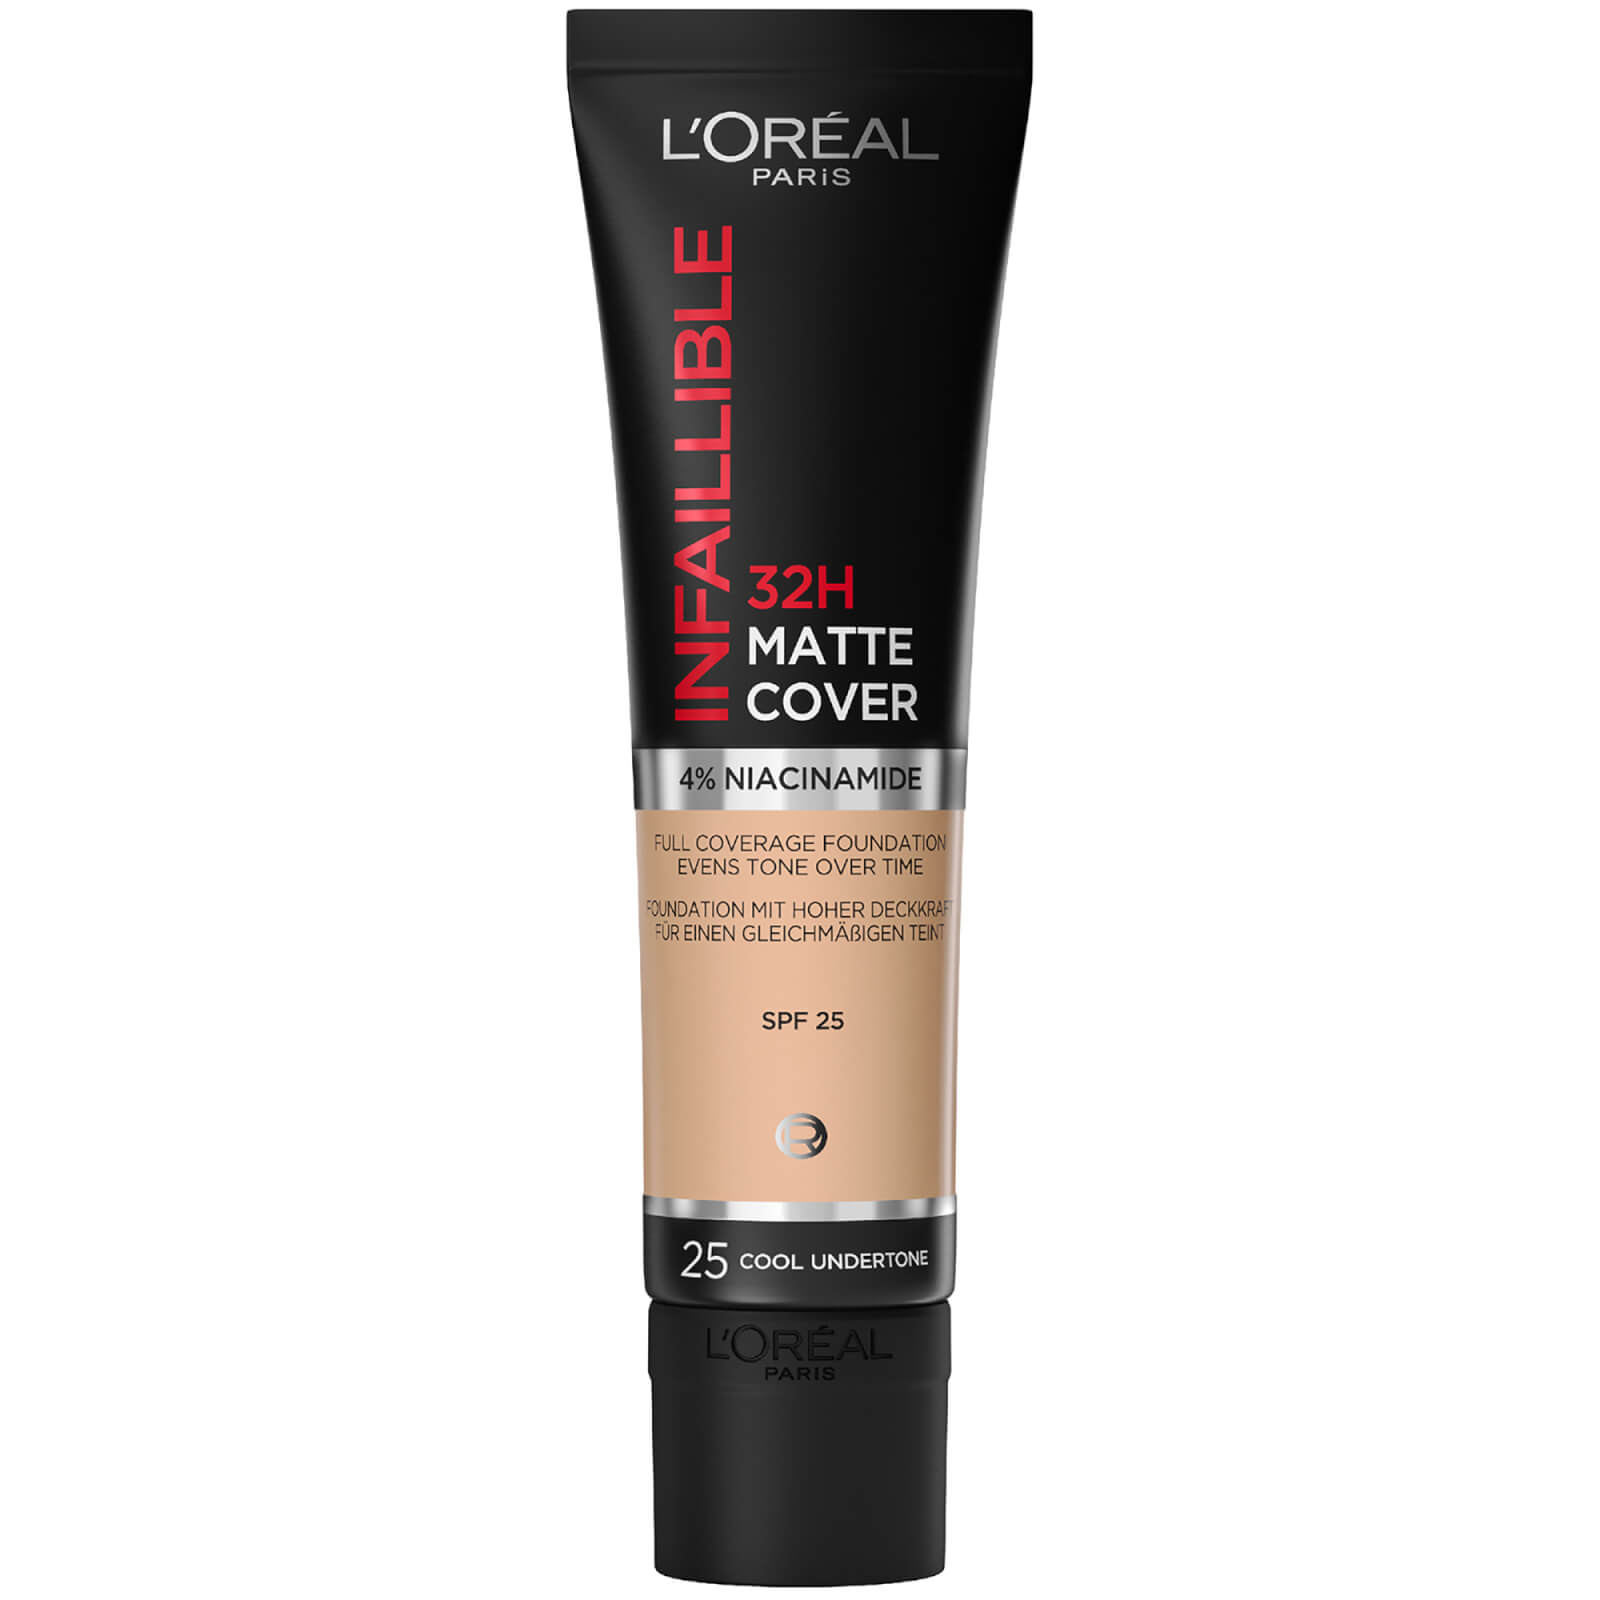 L'Oreal Paris Infallible 32hr Matte Cover Foundation 35ml (Various Shades) - 25 Rose Ivory